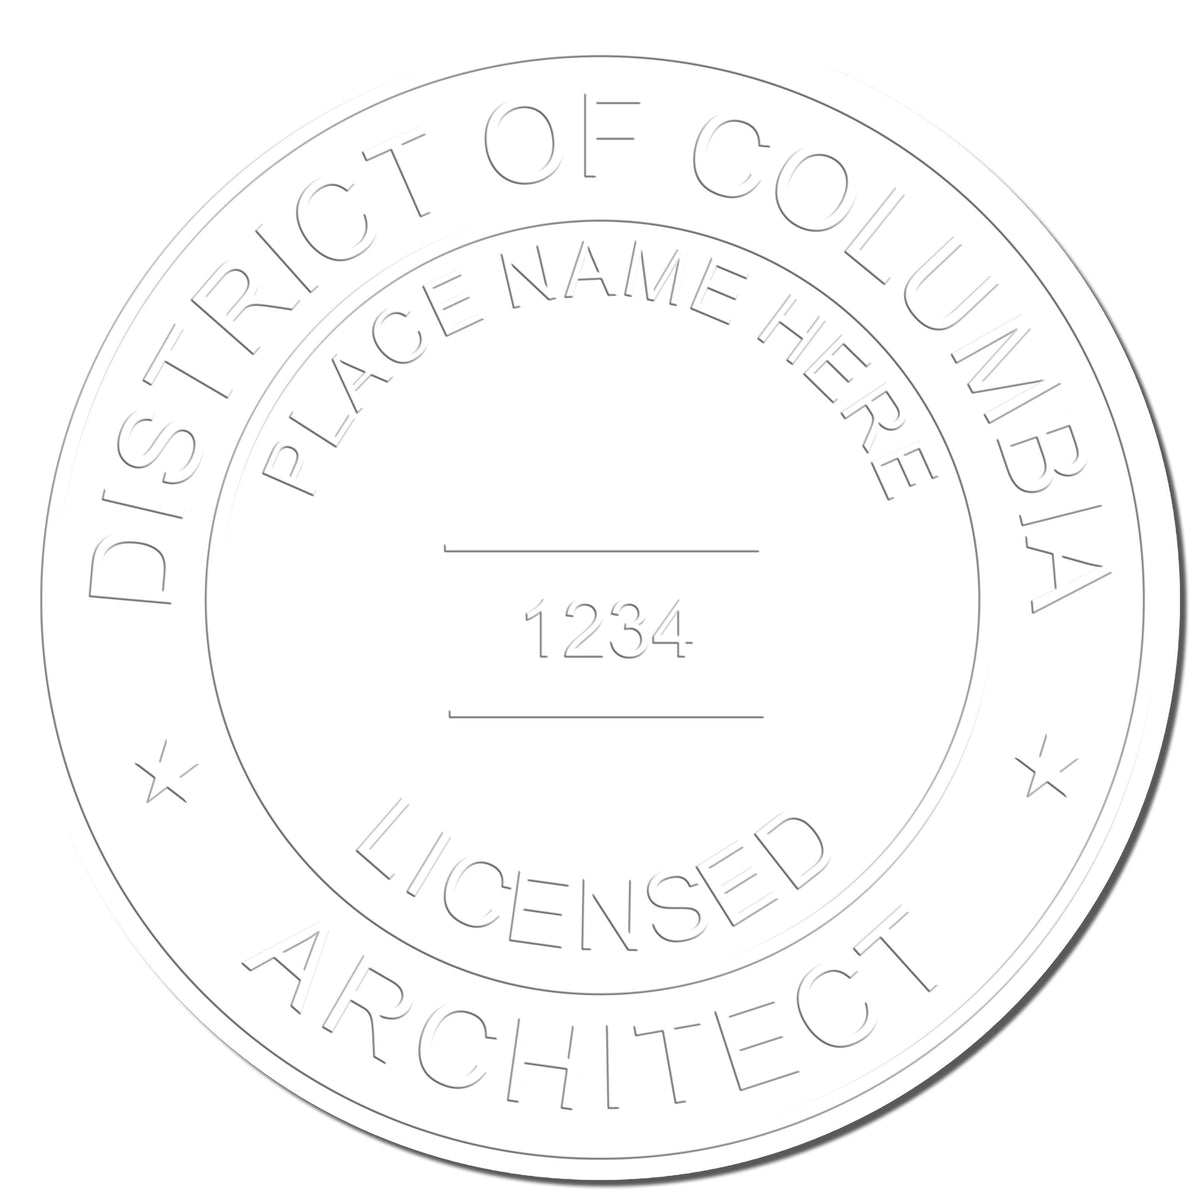 This paper is stamped with a sample imprint of the Gift District of Columbia Architect Seal, signifying its quality and reliability.